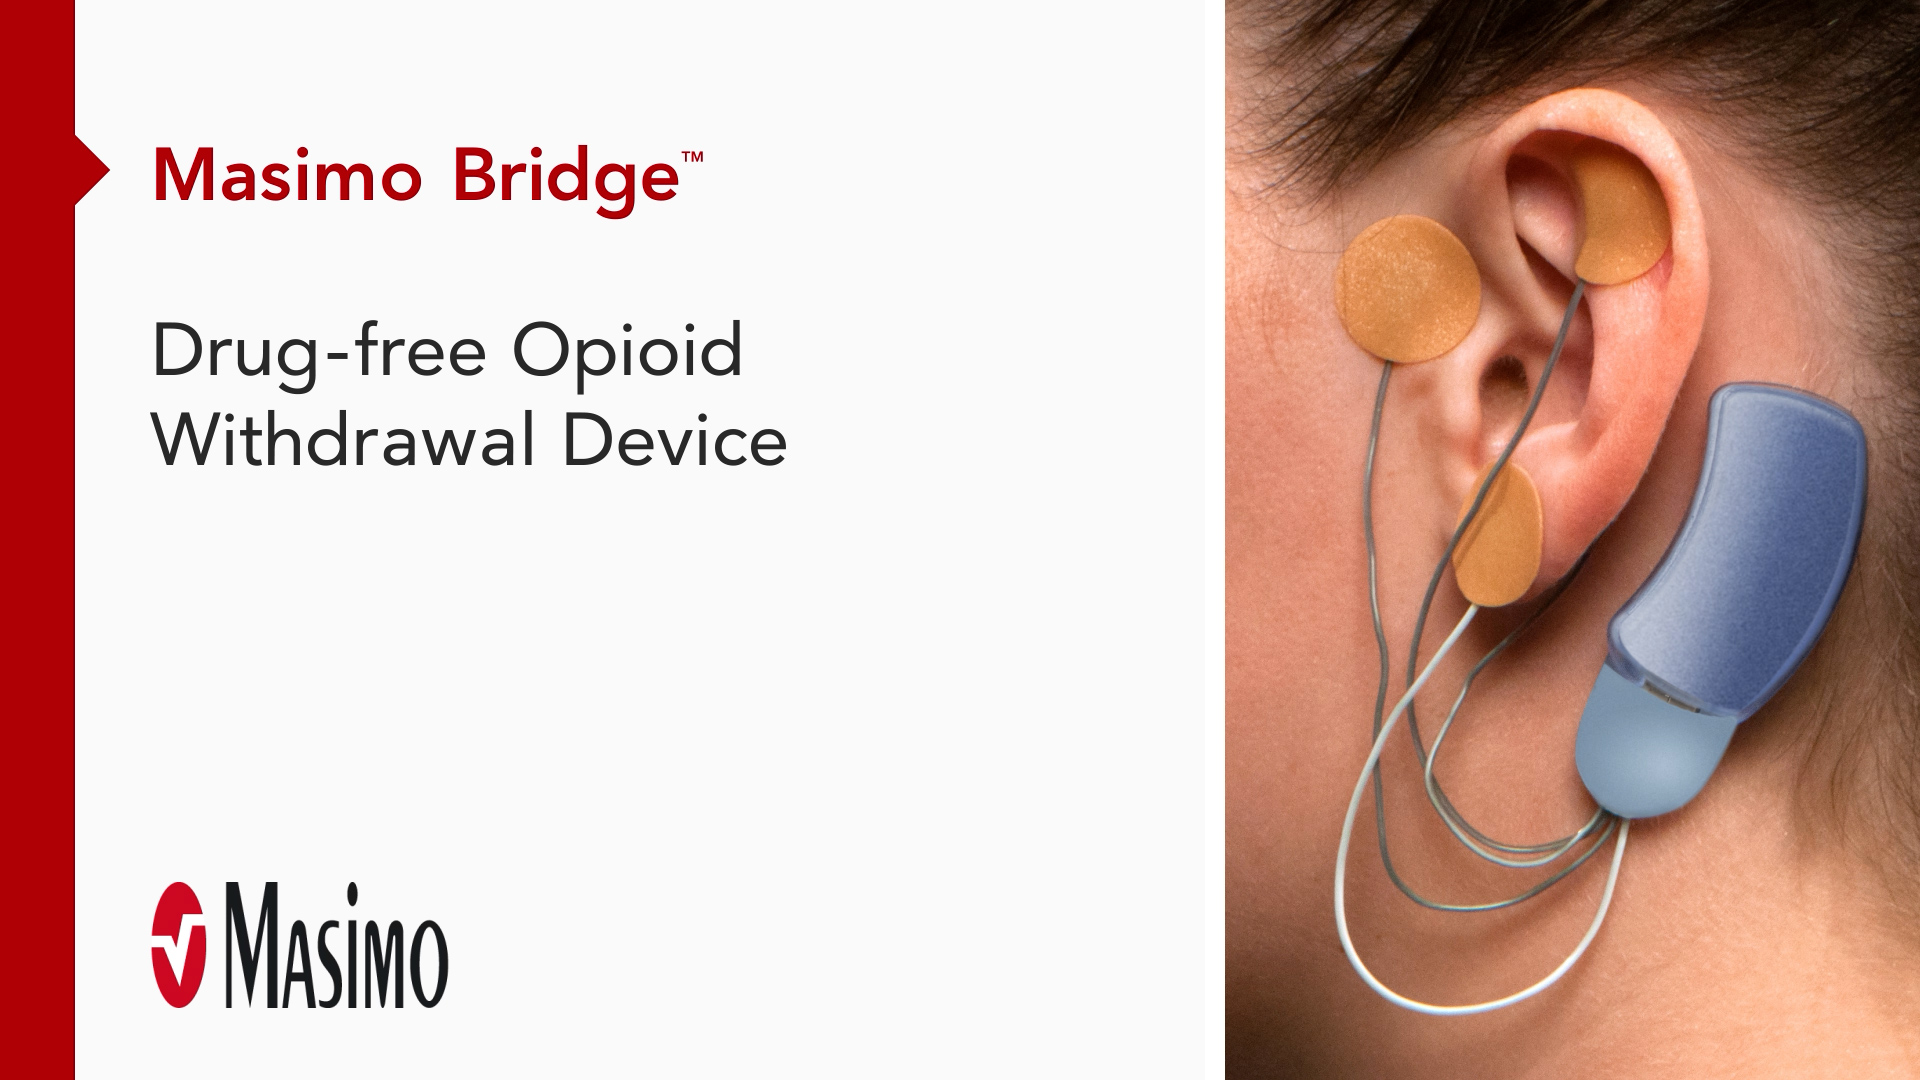 Overview: Masimo Bridge Drug-free Opioid Withdrawal Device